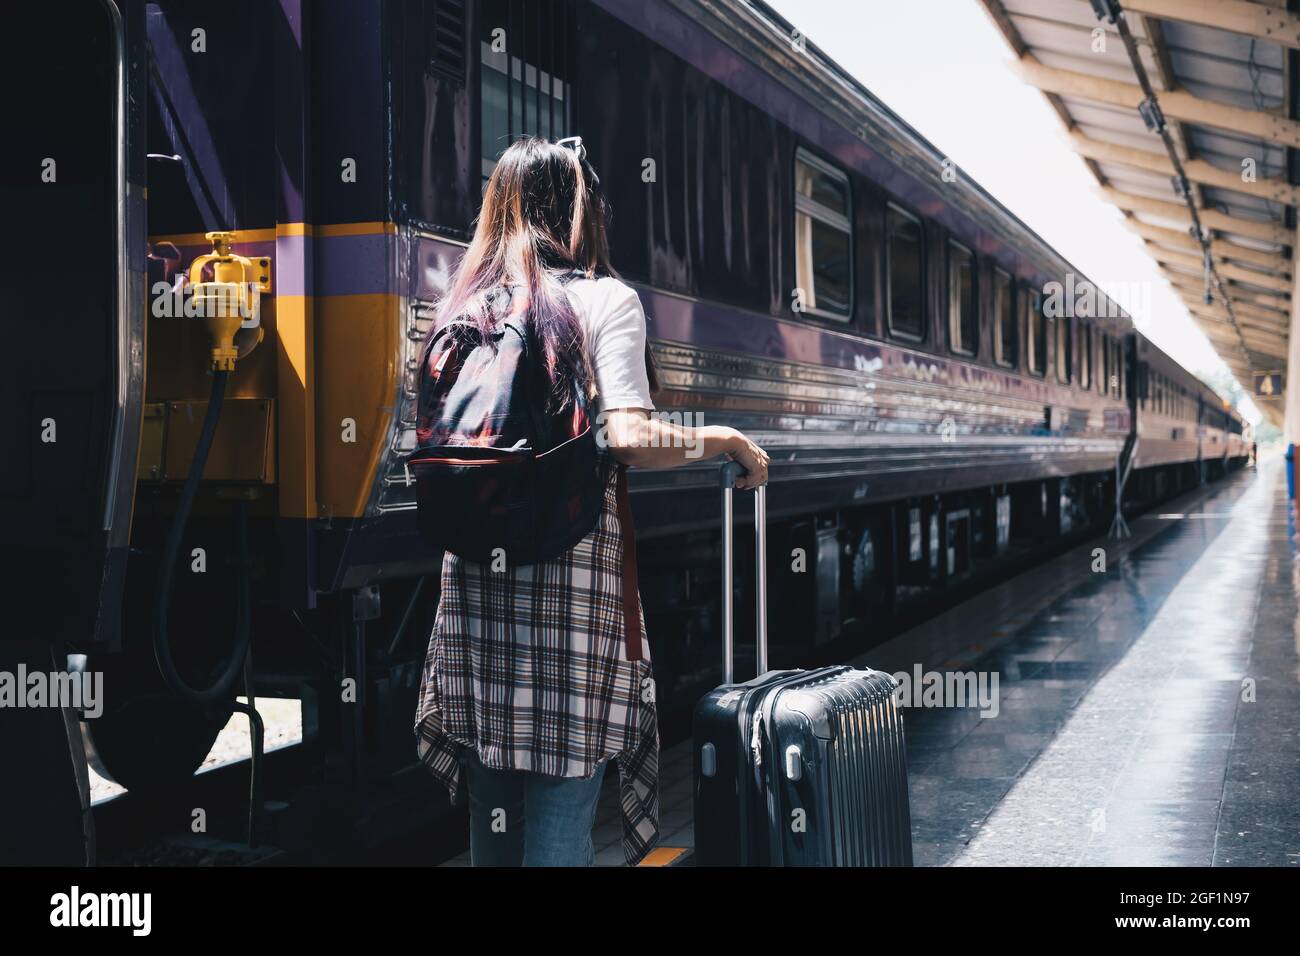 Image of a woman with a rucksack standing at a train station waiting to board a train. concept of solo travel Stock Photo